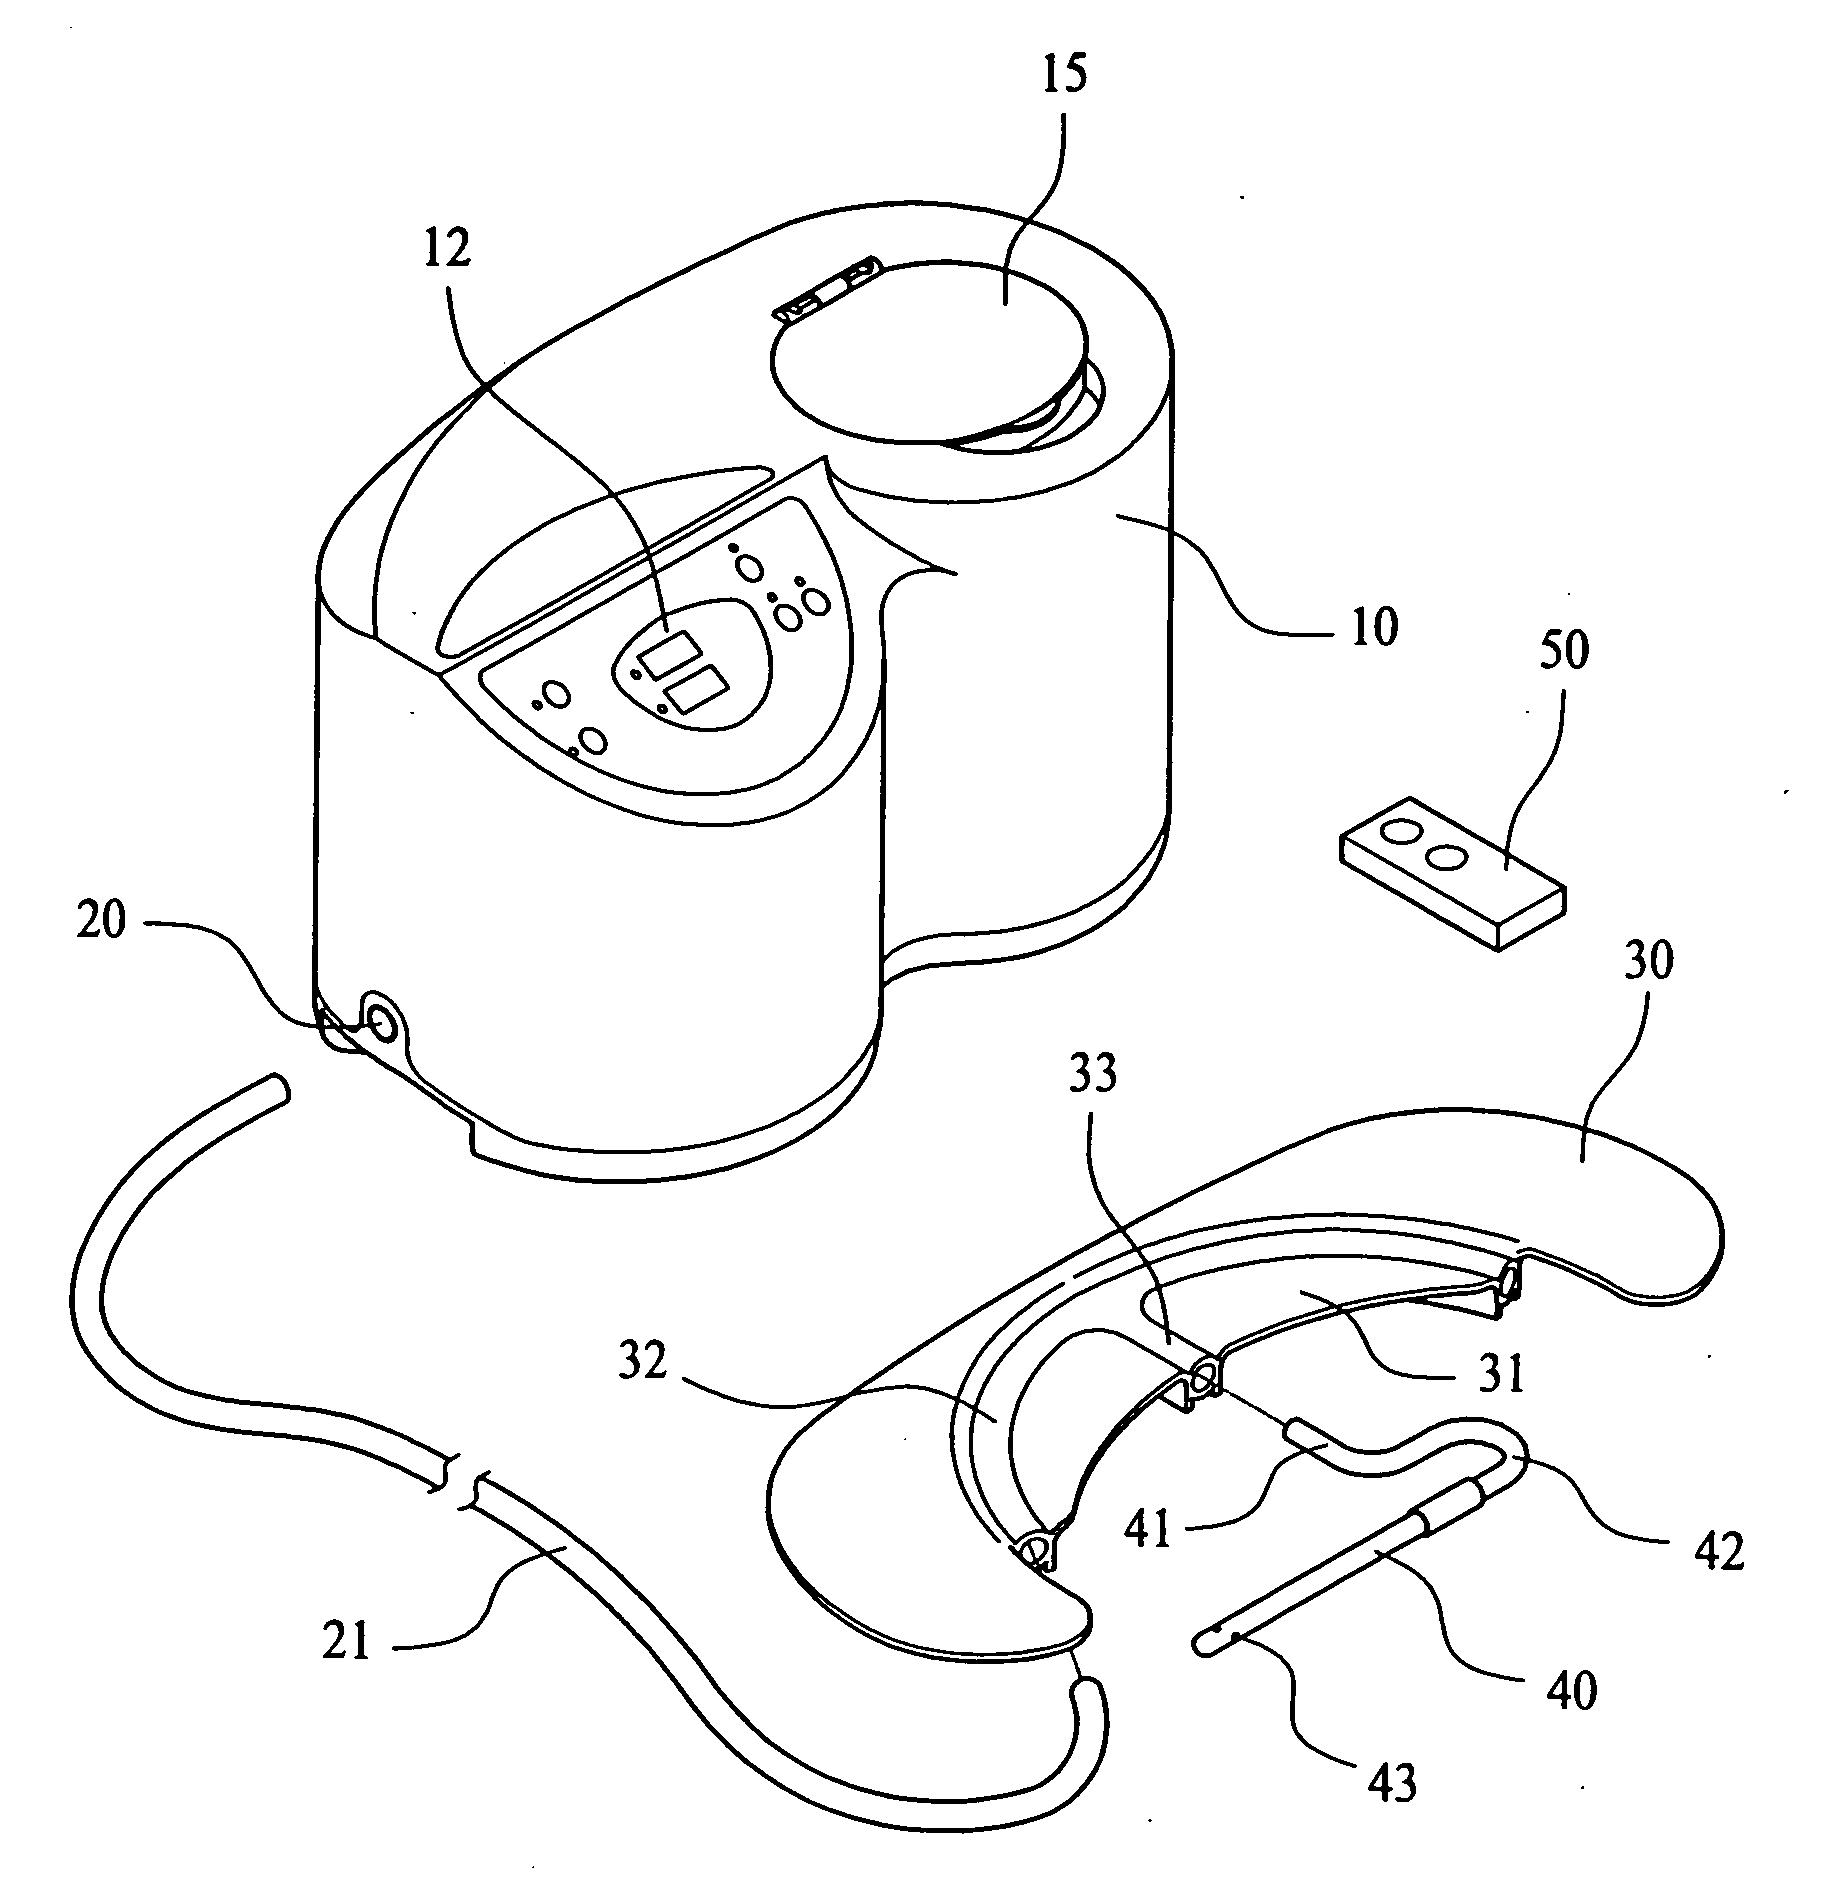 Household-type colon hydrotherapy apparatus